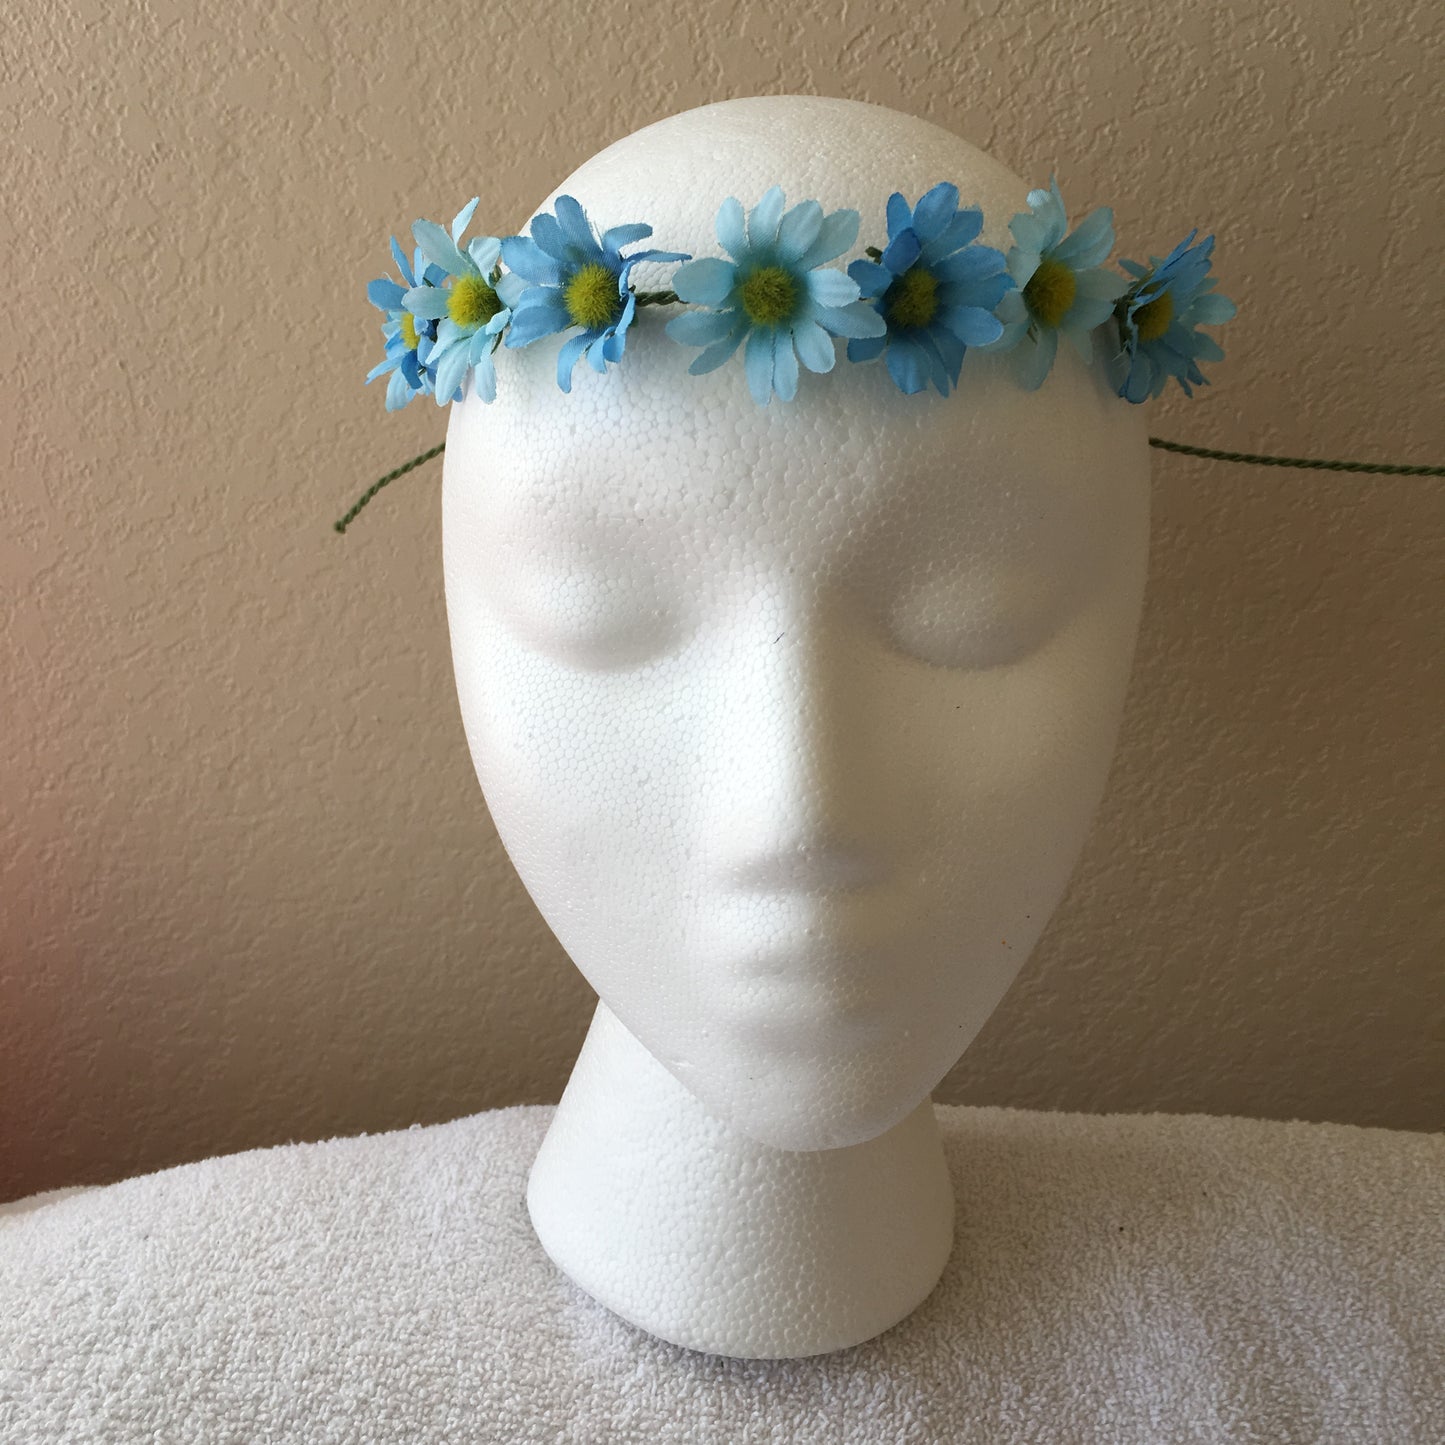 Extra Small Wreath - Light blue daisies w/ yellow fuzzy centers +